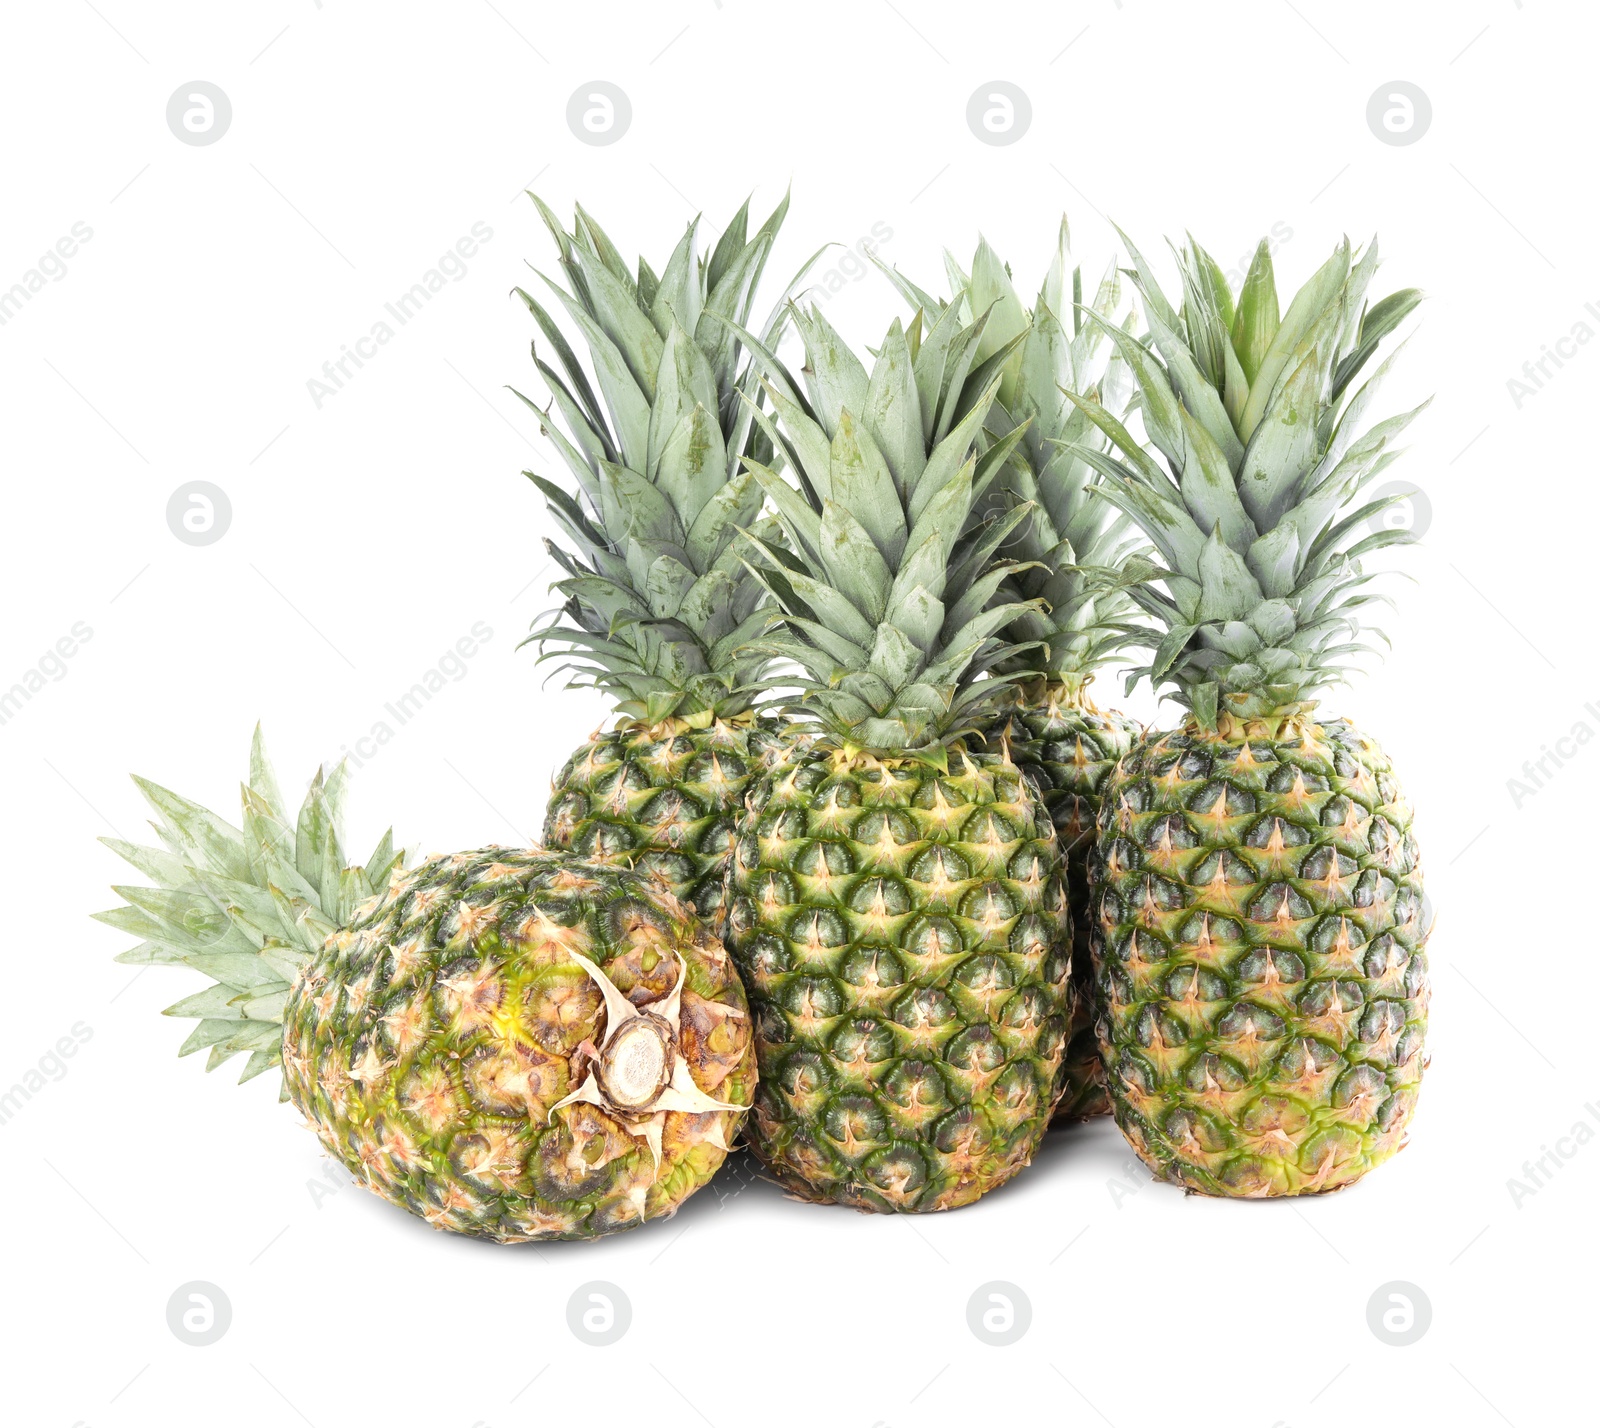 Photo of Many delicious ripe pineapples on white background